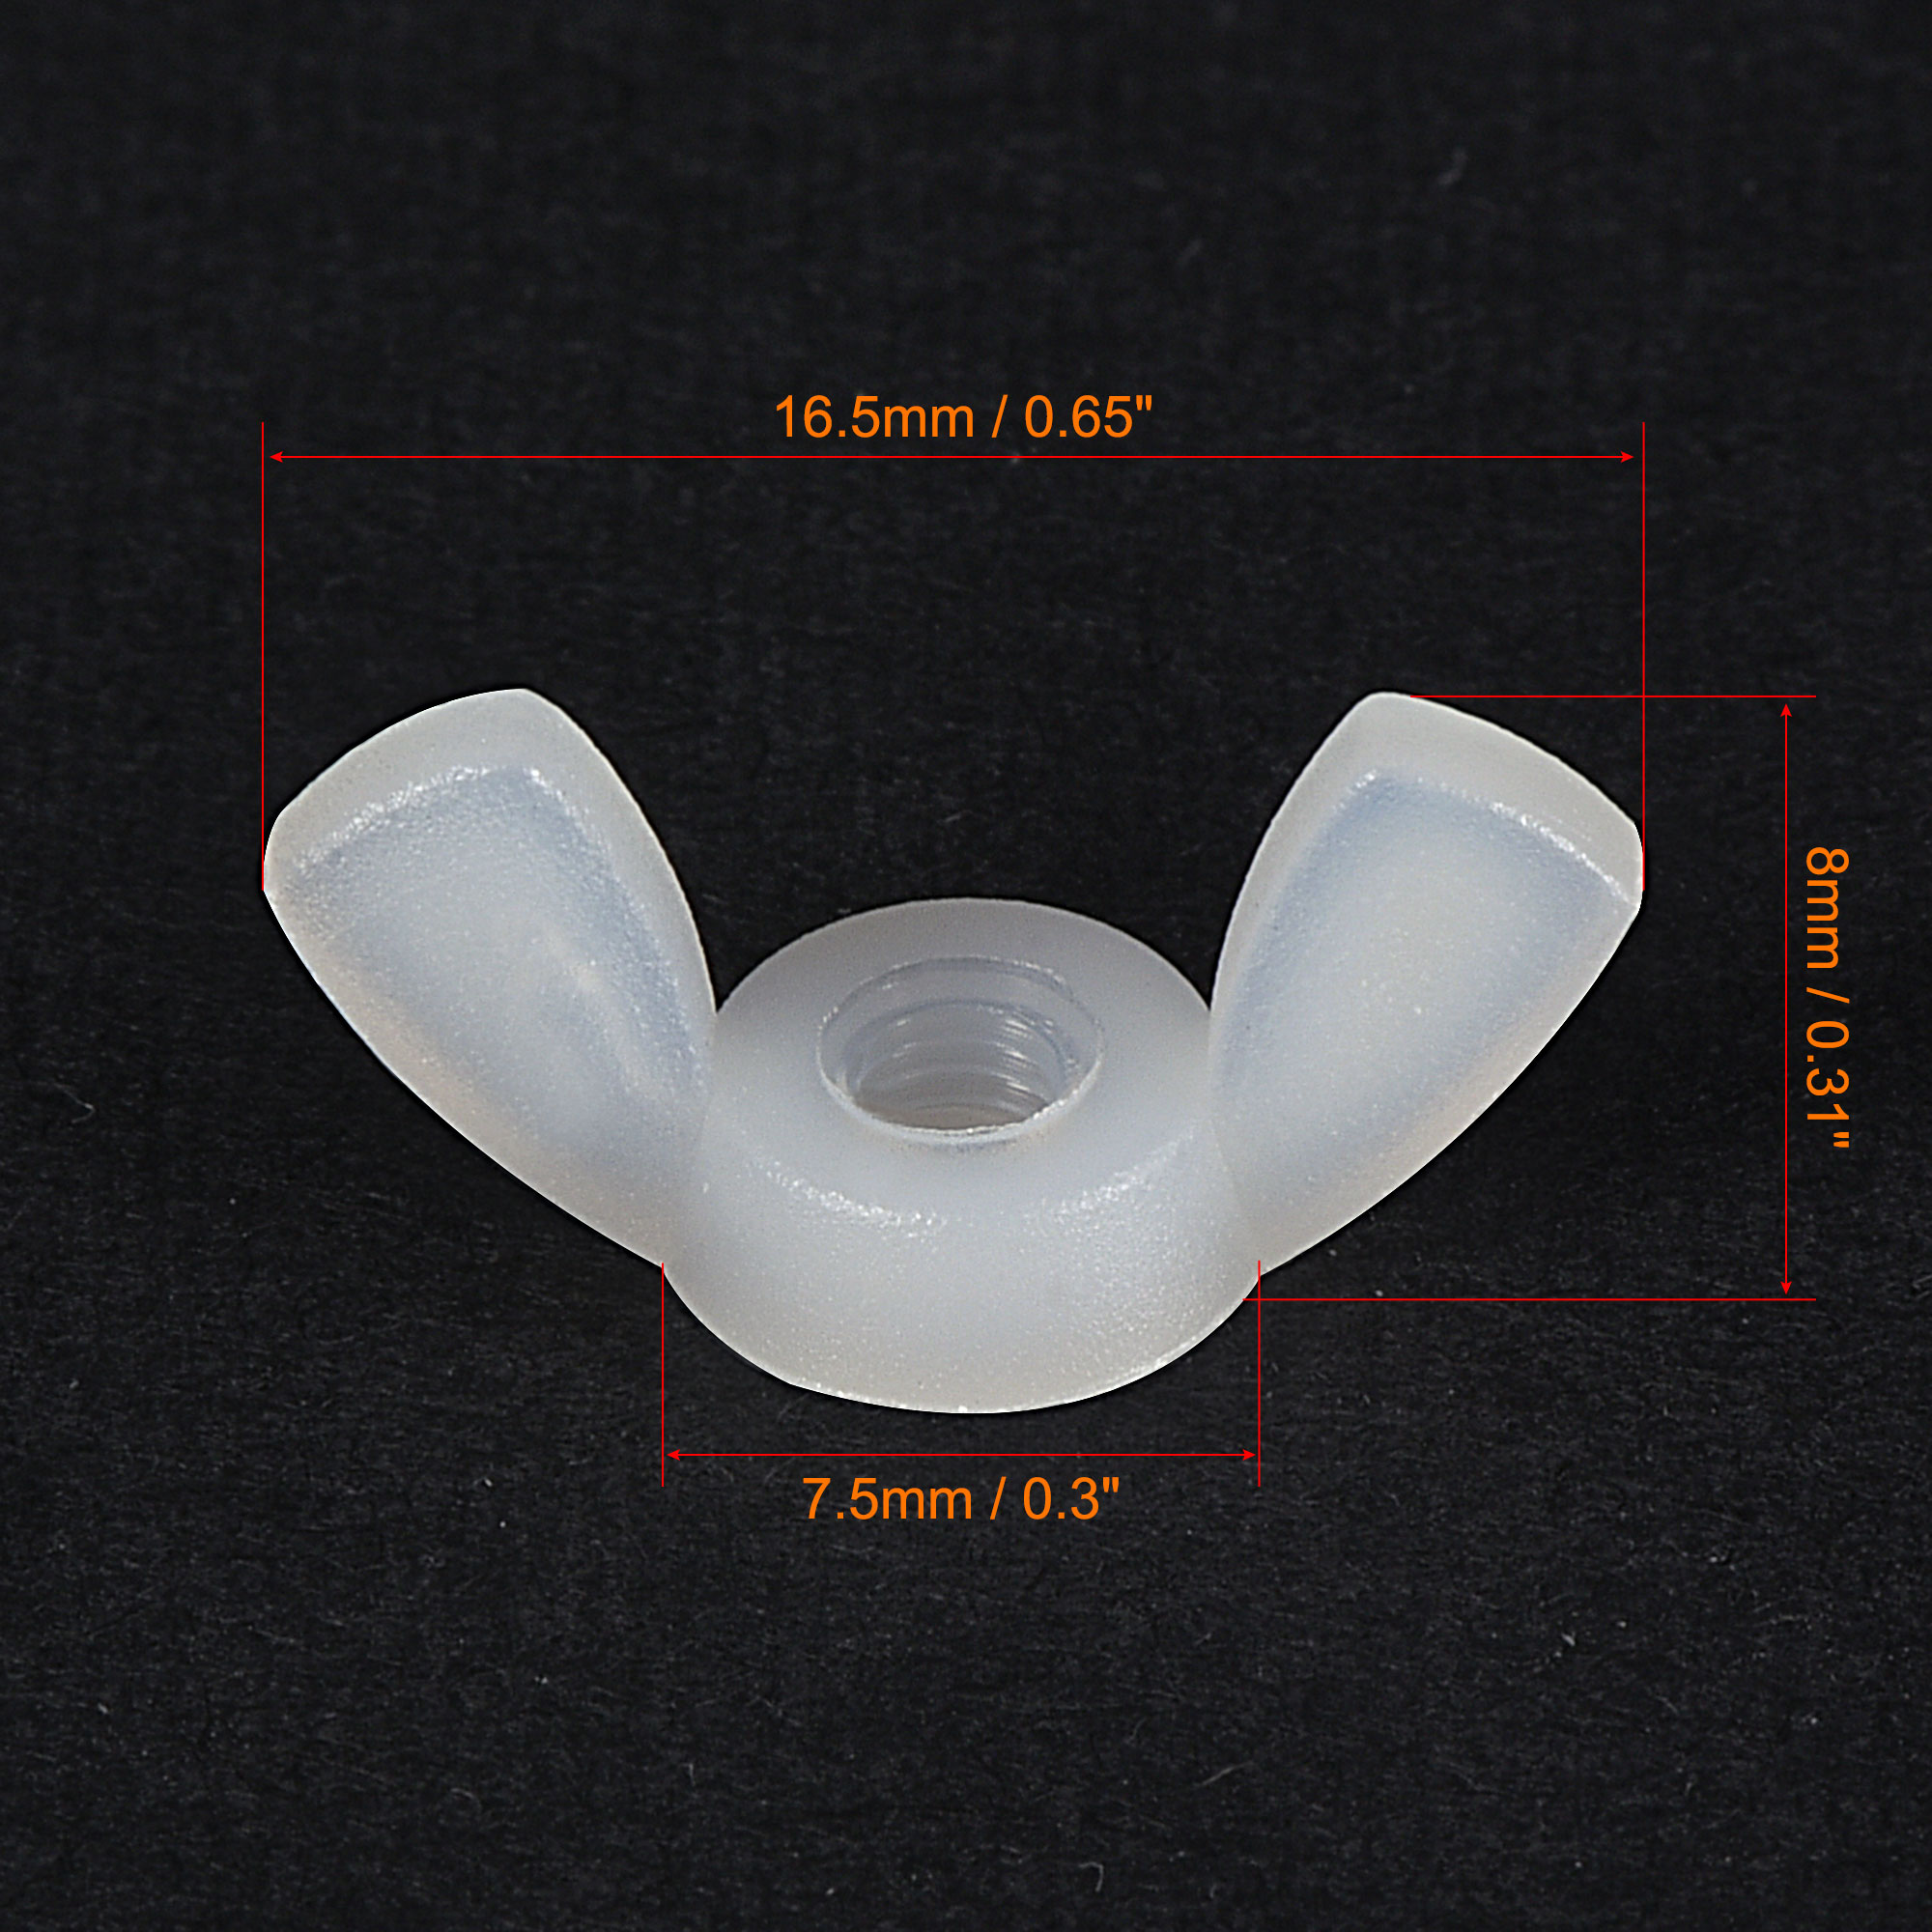 Uxcell M3 Wing Nuts Butterfly Nut Nylon  Hand Twist Tighten Fasteners White 25 Pack - image 2 of 5